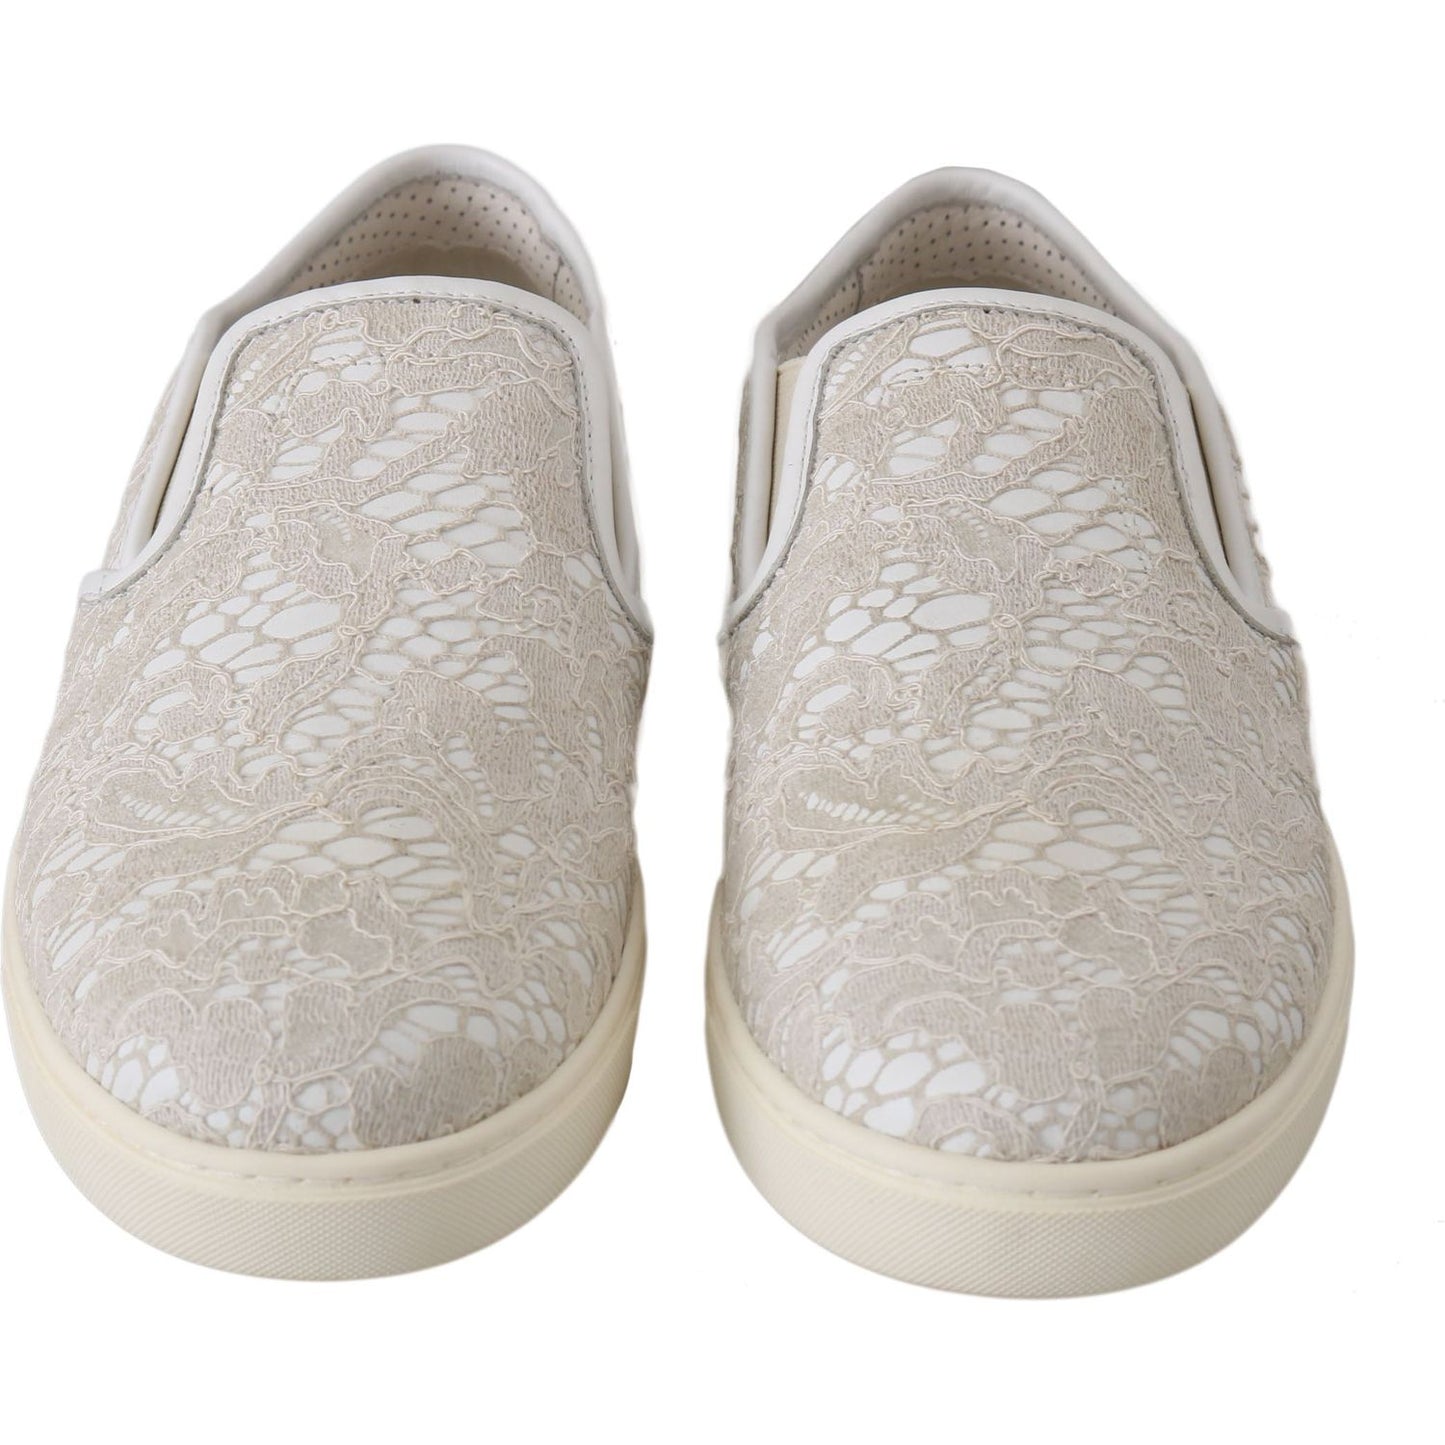 Dolce & Gabbana Elegant Off White Loafers for Ladies WOMAN SNEAKERS white-leather-lace-slip-on-loafers-shoes